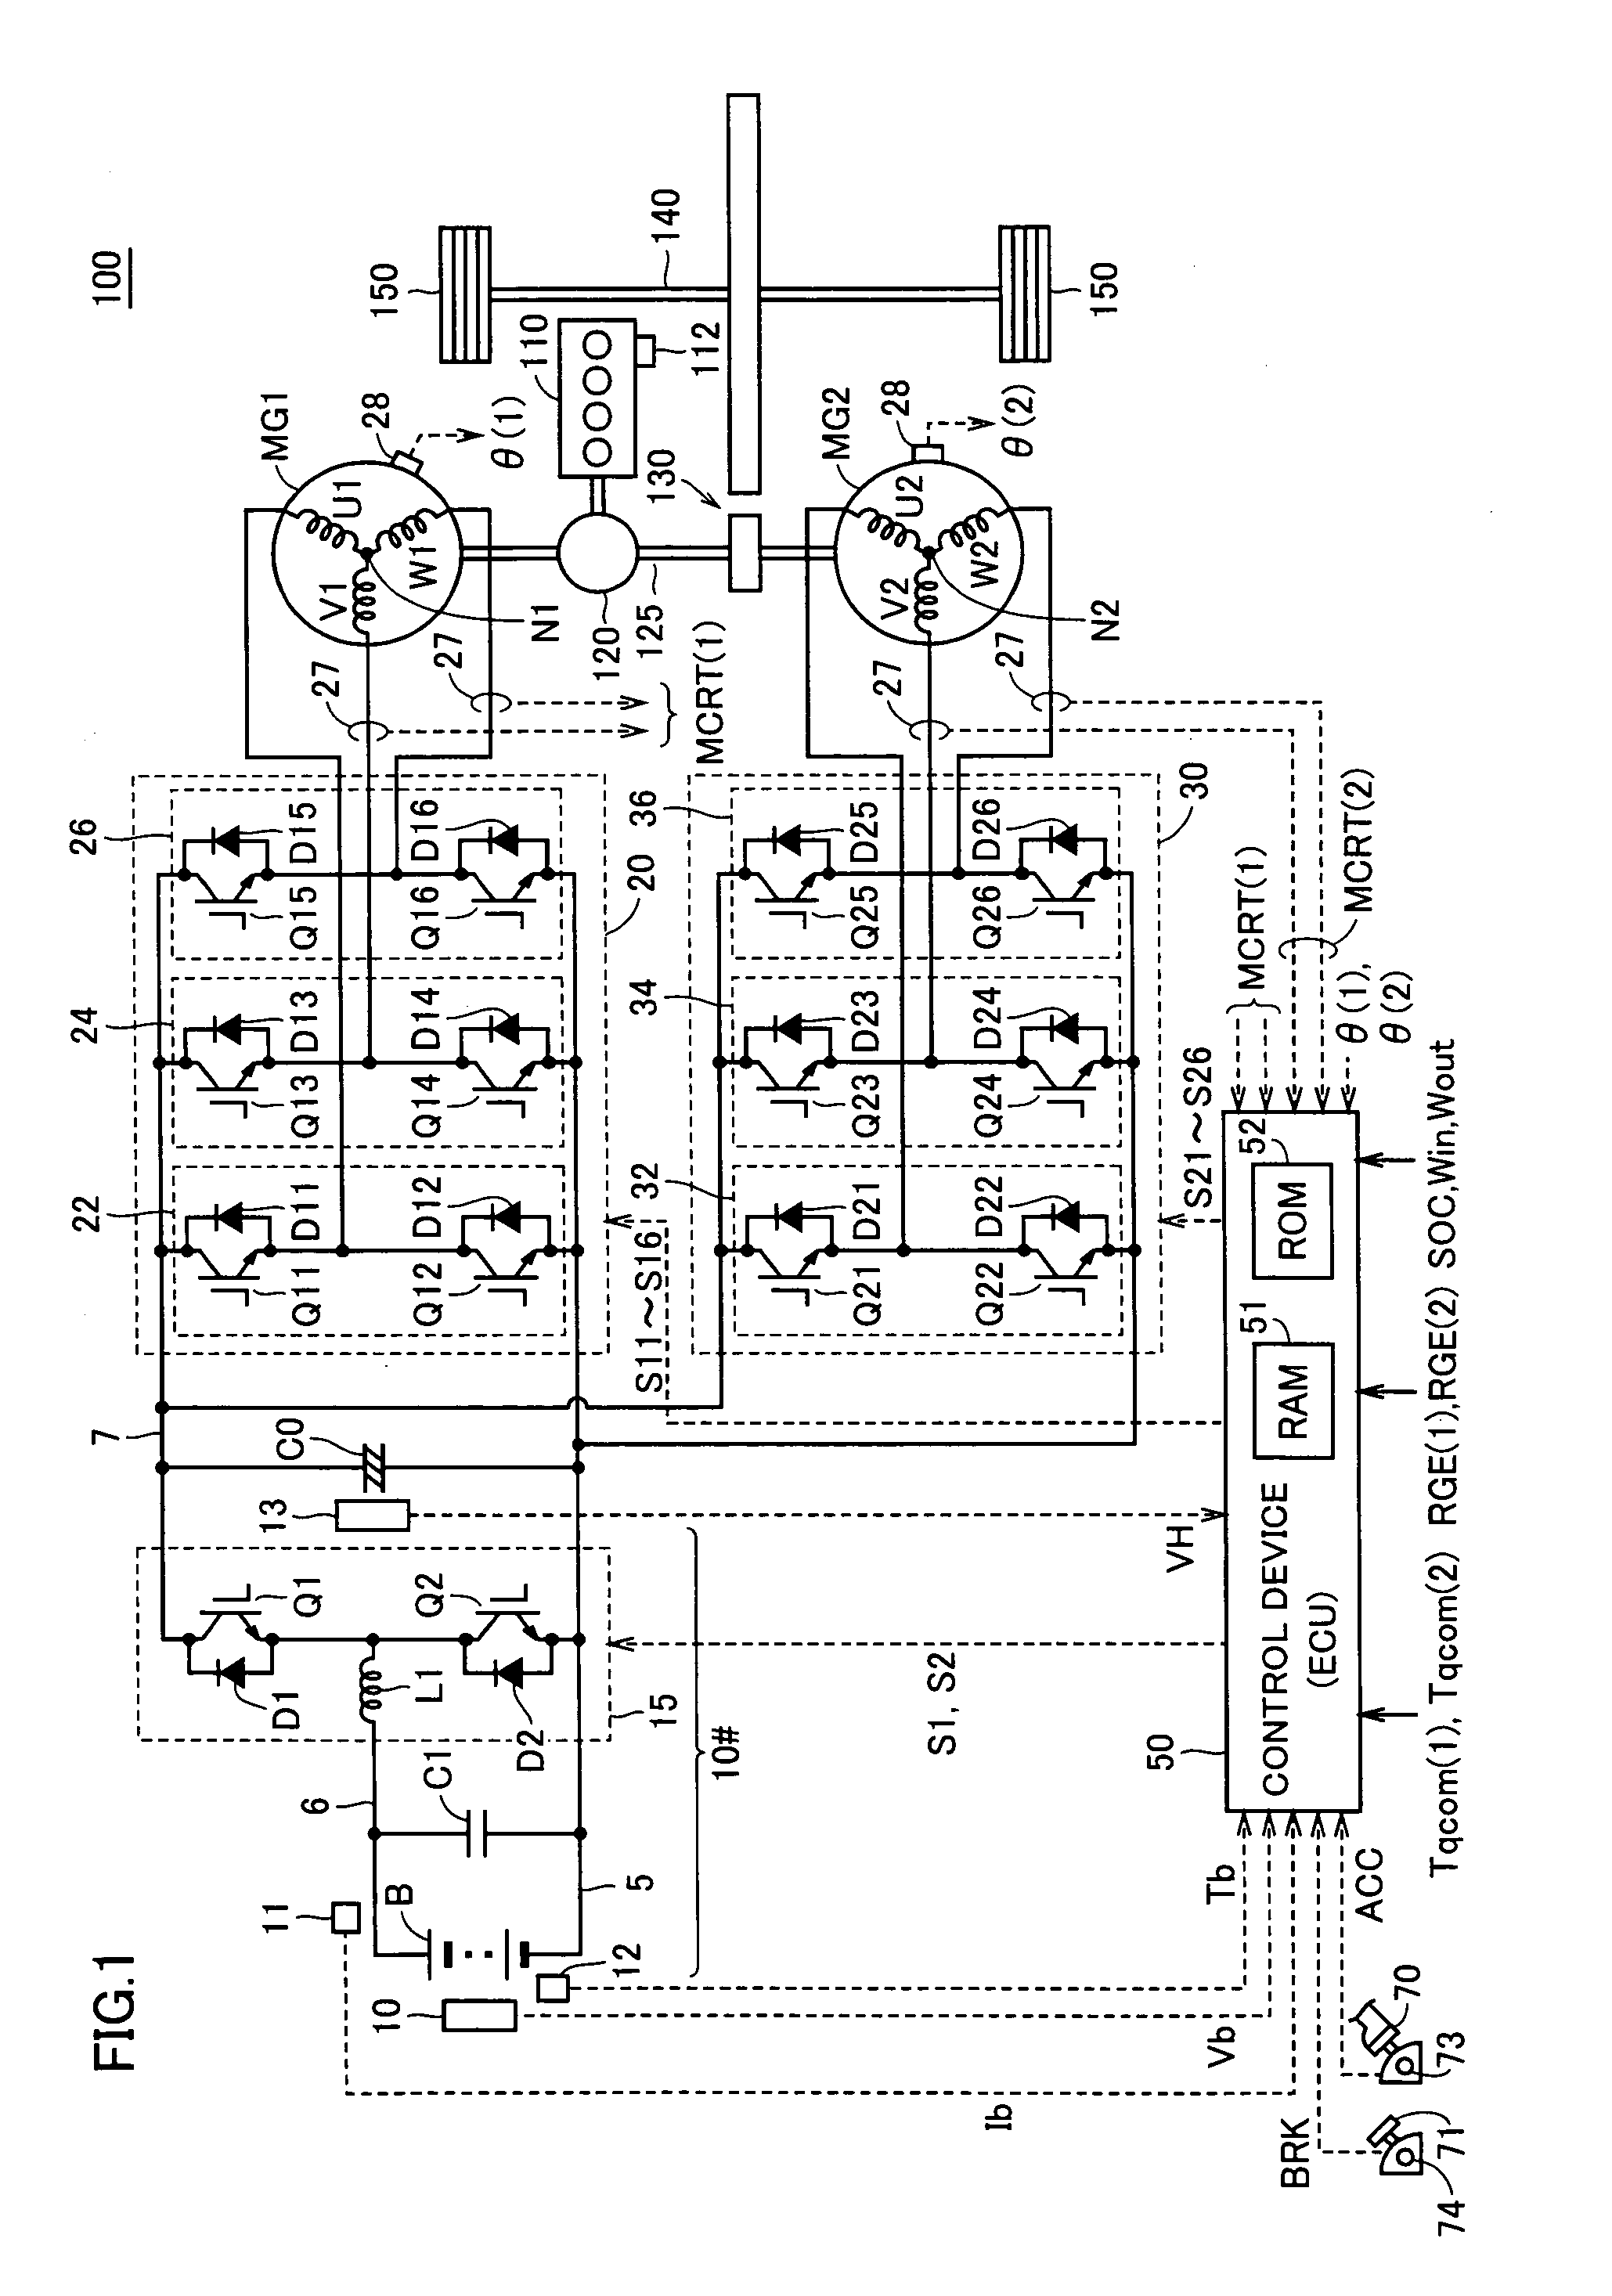 Motor drive control system and method for controlling the same